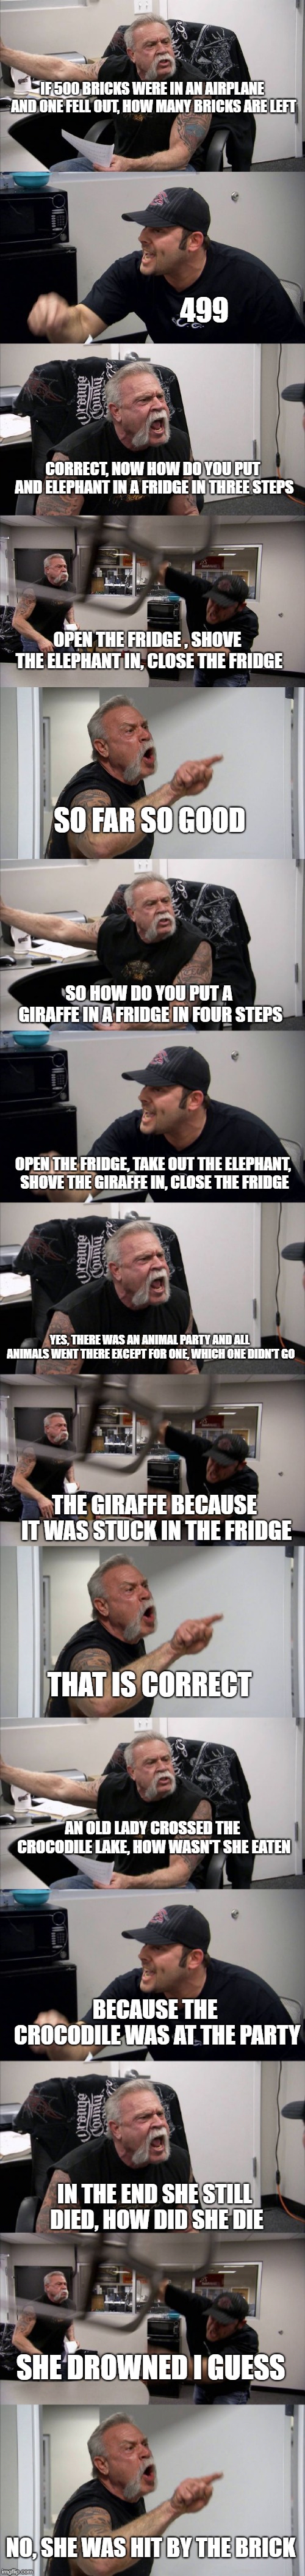 I did this just cuz | IF 500 BRICKS WERE IN AN AIRPLANE AND ONE FELL OUT, HOW MANY BRICKS ARE LEFT; 499; CORRECT, NOW HOW DO YOU PUT AND ELEPHANT IN A FRIDGE IN THREE STEPS; OPEN THE FRIDGE , SHOVE THE ELEPHANT IN, CLOSE THE FRIDGE; SO FAR SO GOOD; SO HOW DO YOU PUT A GIRAFFE IN A FRIDGE IN FOUR STEPS; OPEN THE FRIDGE, TAKE OUT THE ELEPHANT, SHOVE THE GIRAFFE IN, CLOSE THE FRIDGE; YES, THERE WAS AN ANIMAL PARTY AND ALL ANIMALS WENT THERE EXCEPT FOR ONE, WHICH ONE DIDN'T GO; THE GIRAFFE BECAUSE IT WAS STUCK IN THE FRIDGE; THAT IS CORRECT; AN OLD LADY CROSSED THE CROCODILE LAKE, HOW WASN'T SHE EATEN; BECAUSE THE CROCODILE WAS AT THE PARTY; IN THE END SHE STILL DIED, HOW DID SHE DIE; SHE DROWNED I GUESS; NO, SHE WAS HIT BY THE BRICK | image tagged in memes,american chopper argument | made w/ Imgflip meme maker